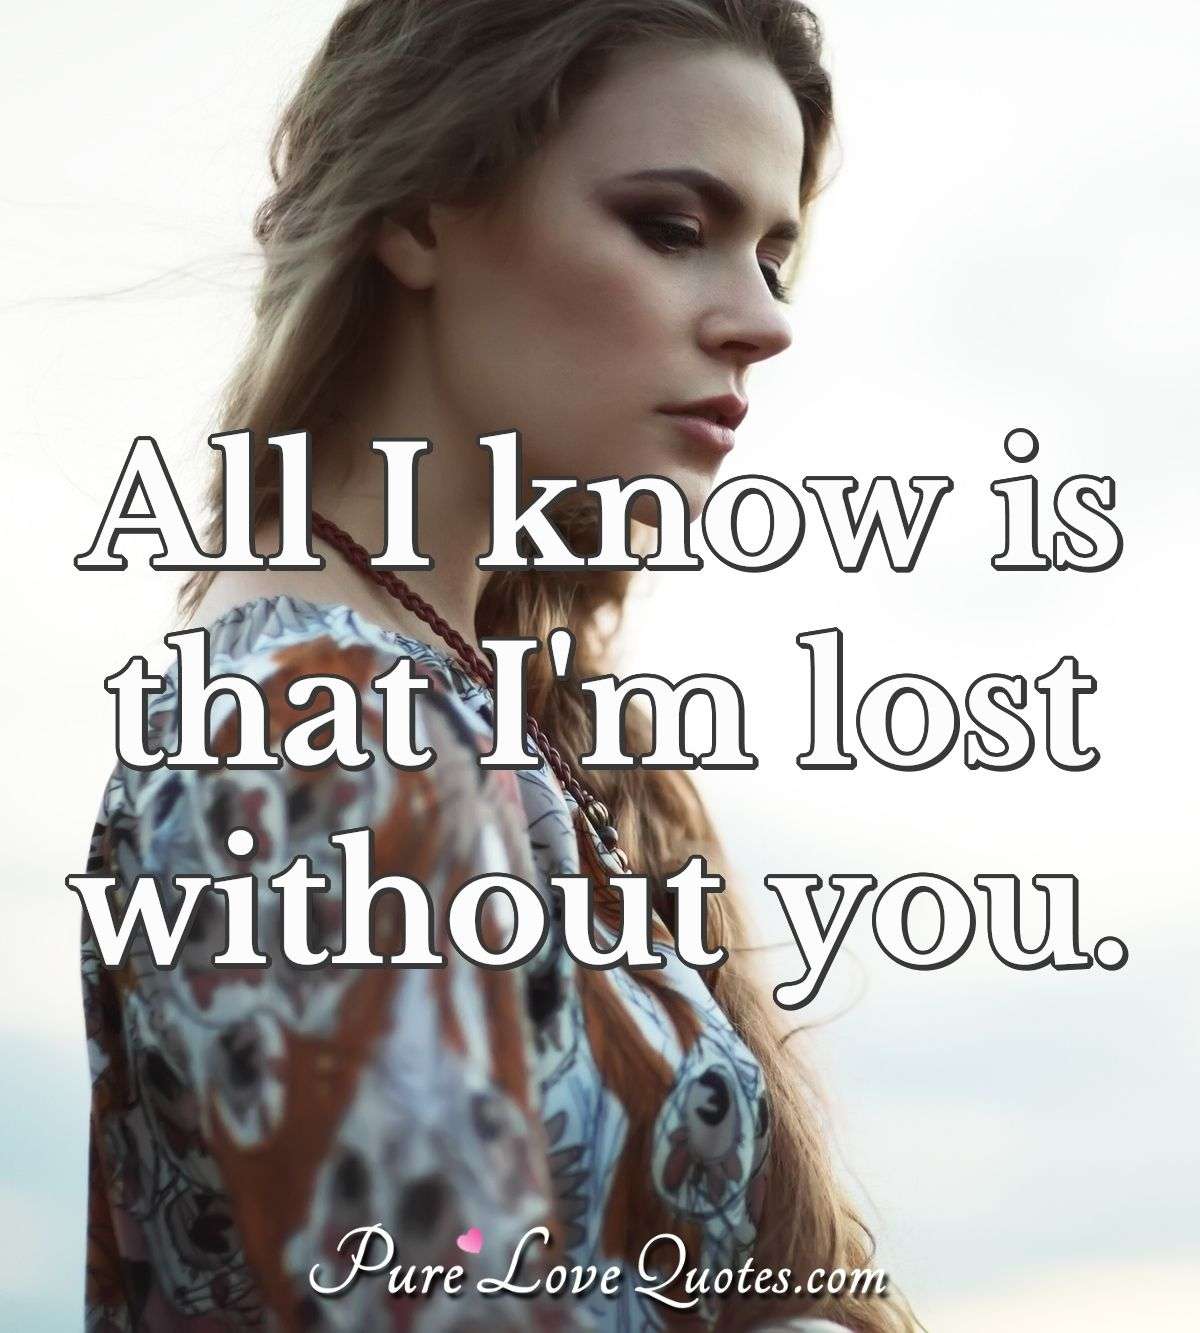 All I know is that I'm lost without you. - Anonymous